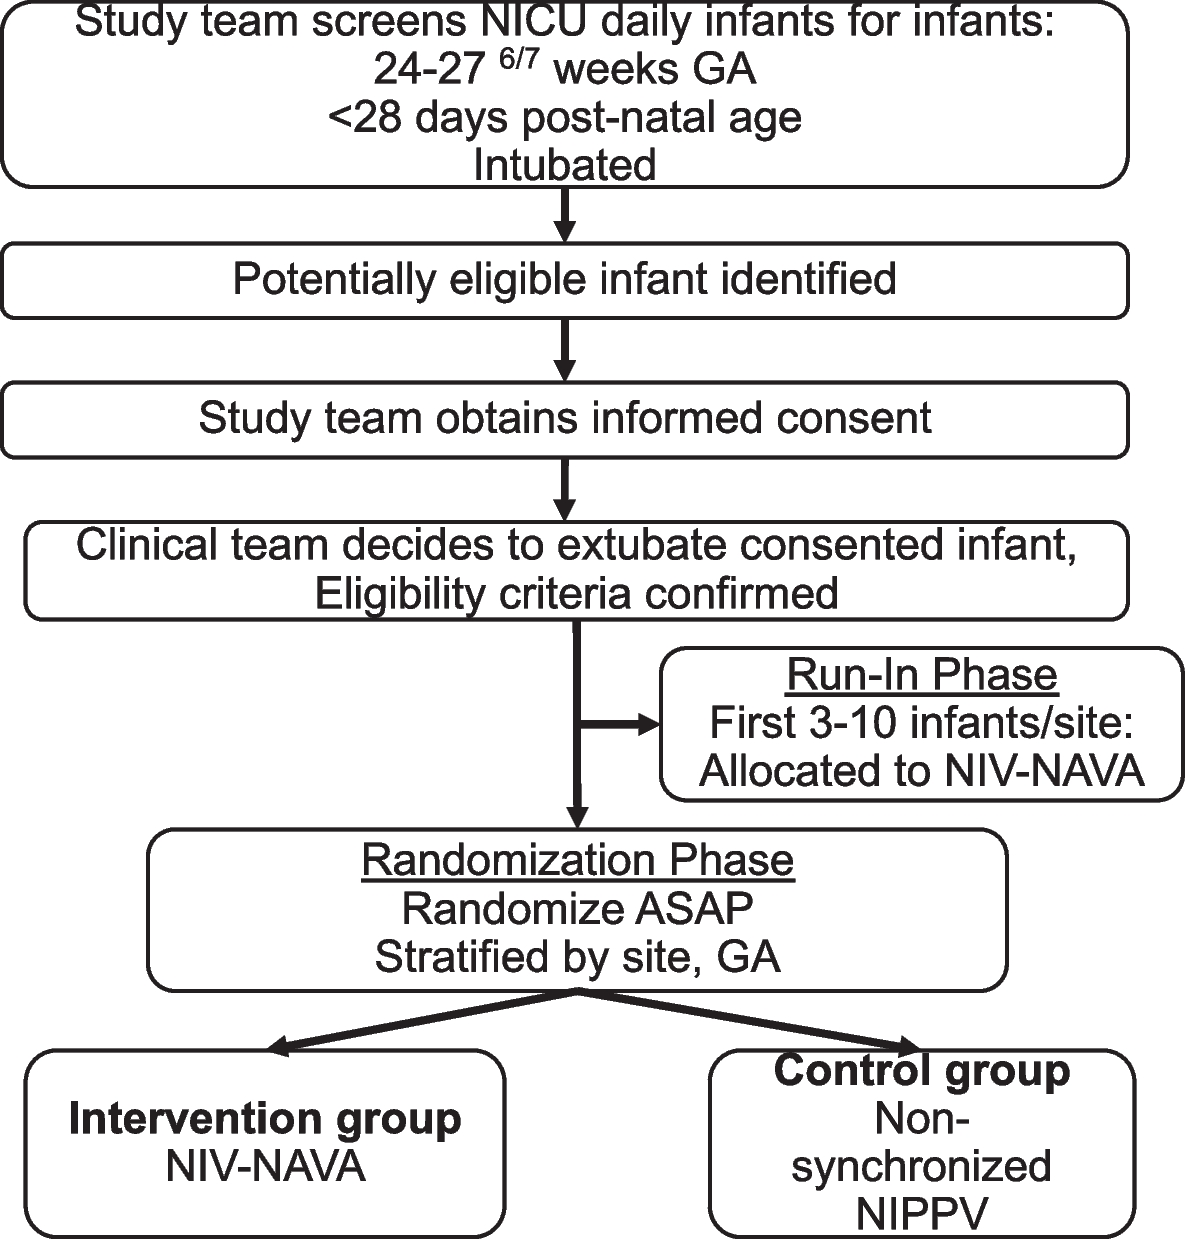 The Diaphragmatic Initiated Ventilatory Assist (DIVA) trial: study protocol for a randomized controlled trial comparing rates of extubation failure in extremely premature infants undergoing extubation to non-invasive neurally adjusted ventilatory assist versus non-synchronized nasal intermittent positive pressure ventilation